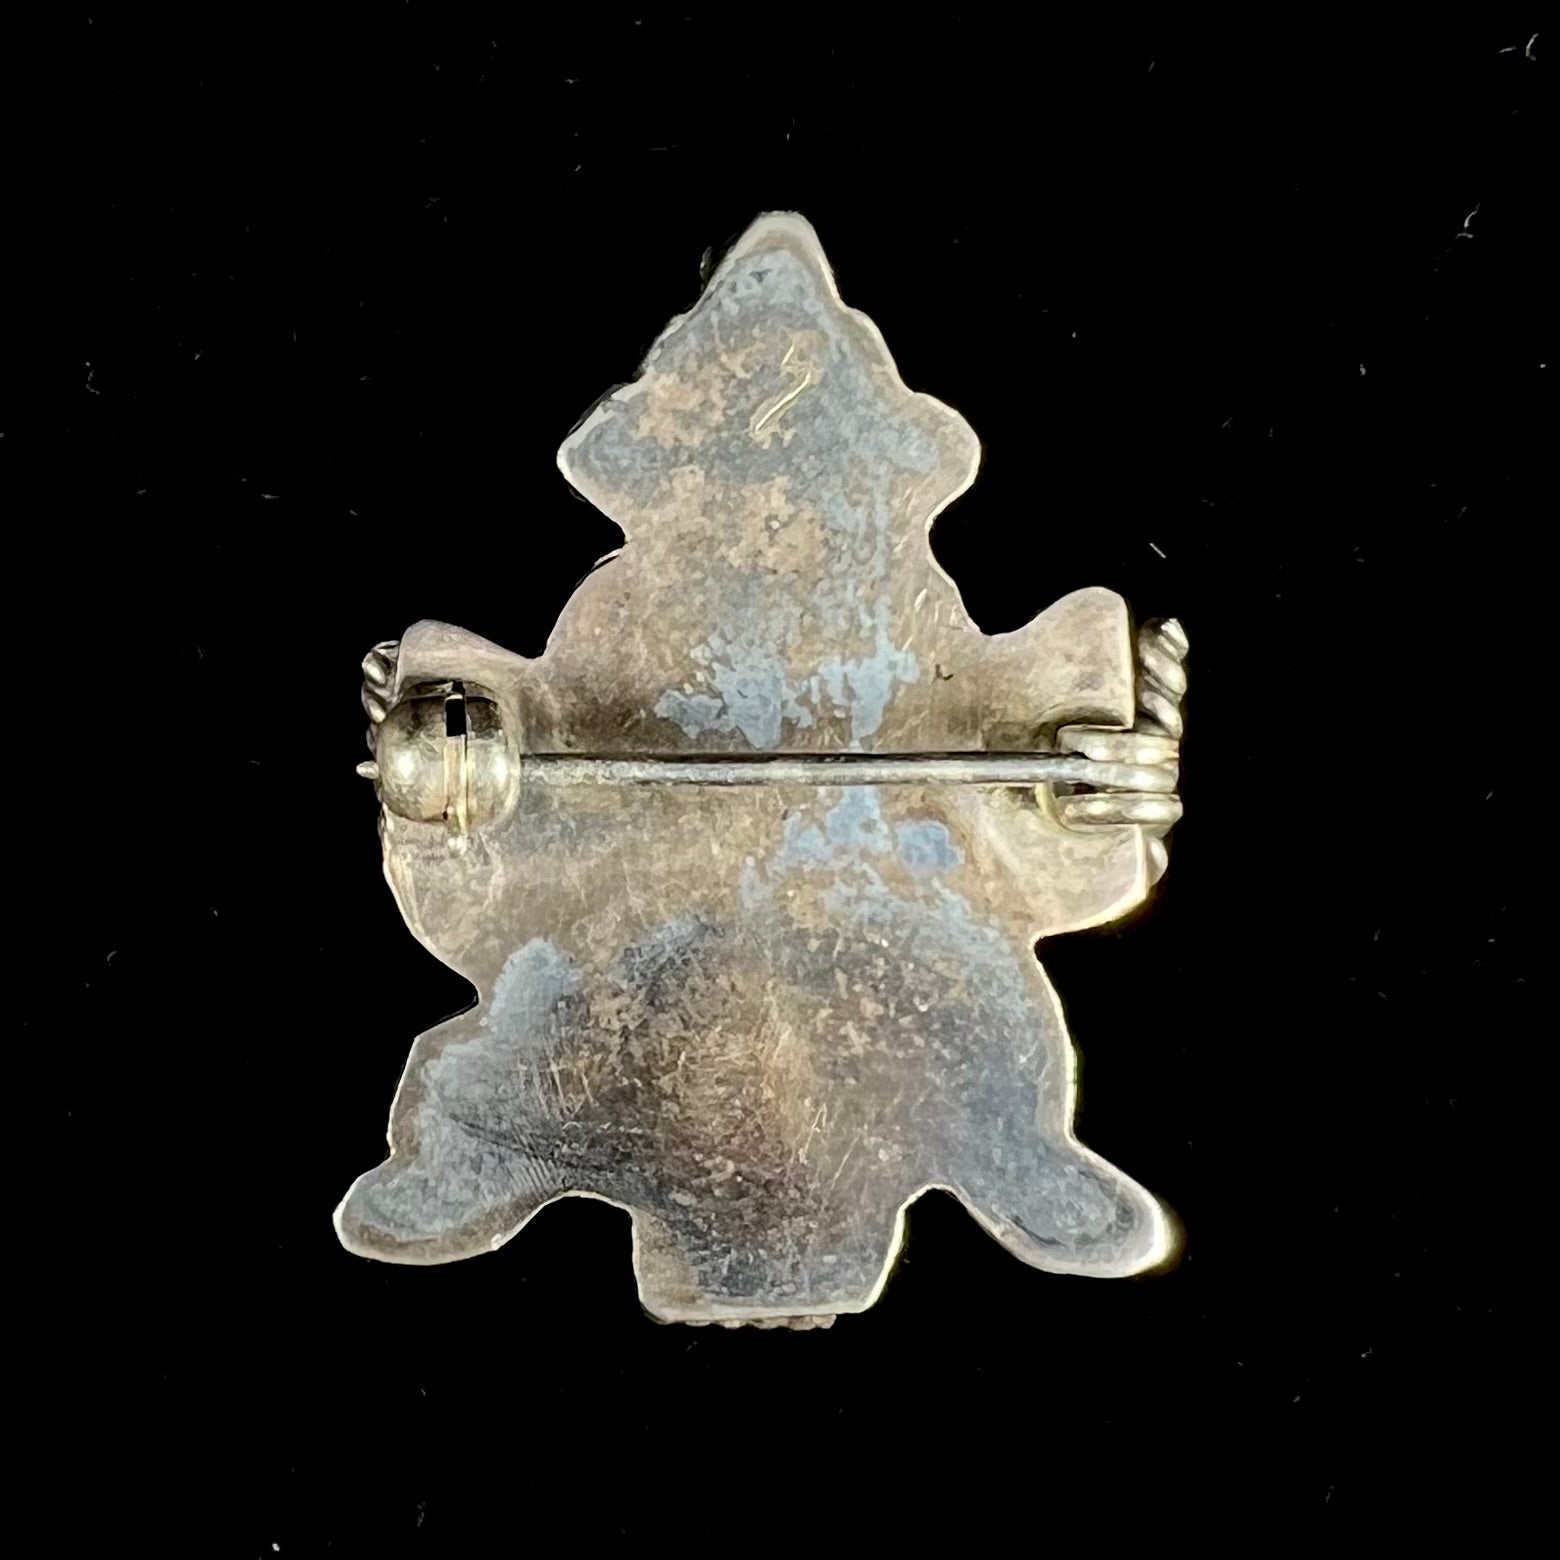 A sterling silver brooch depicting a Zuni Indian knifewing dancer, inlaid with jet, turquoise, coral, and mother of pearl.